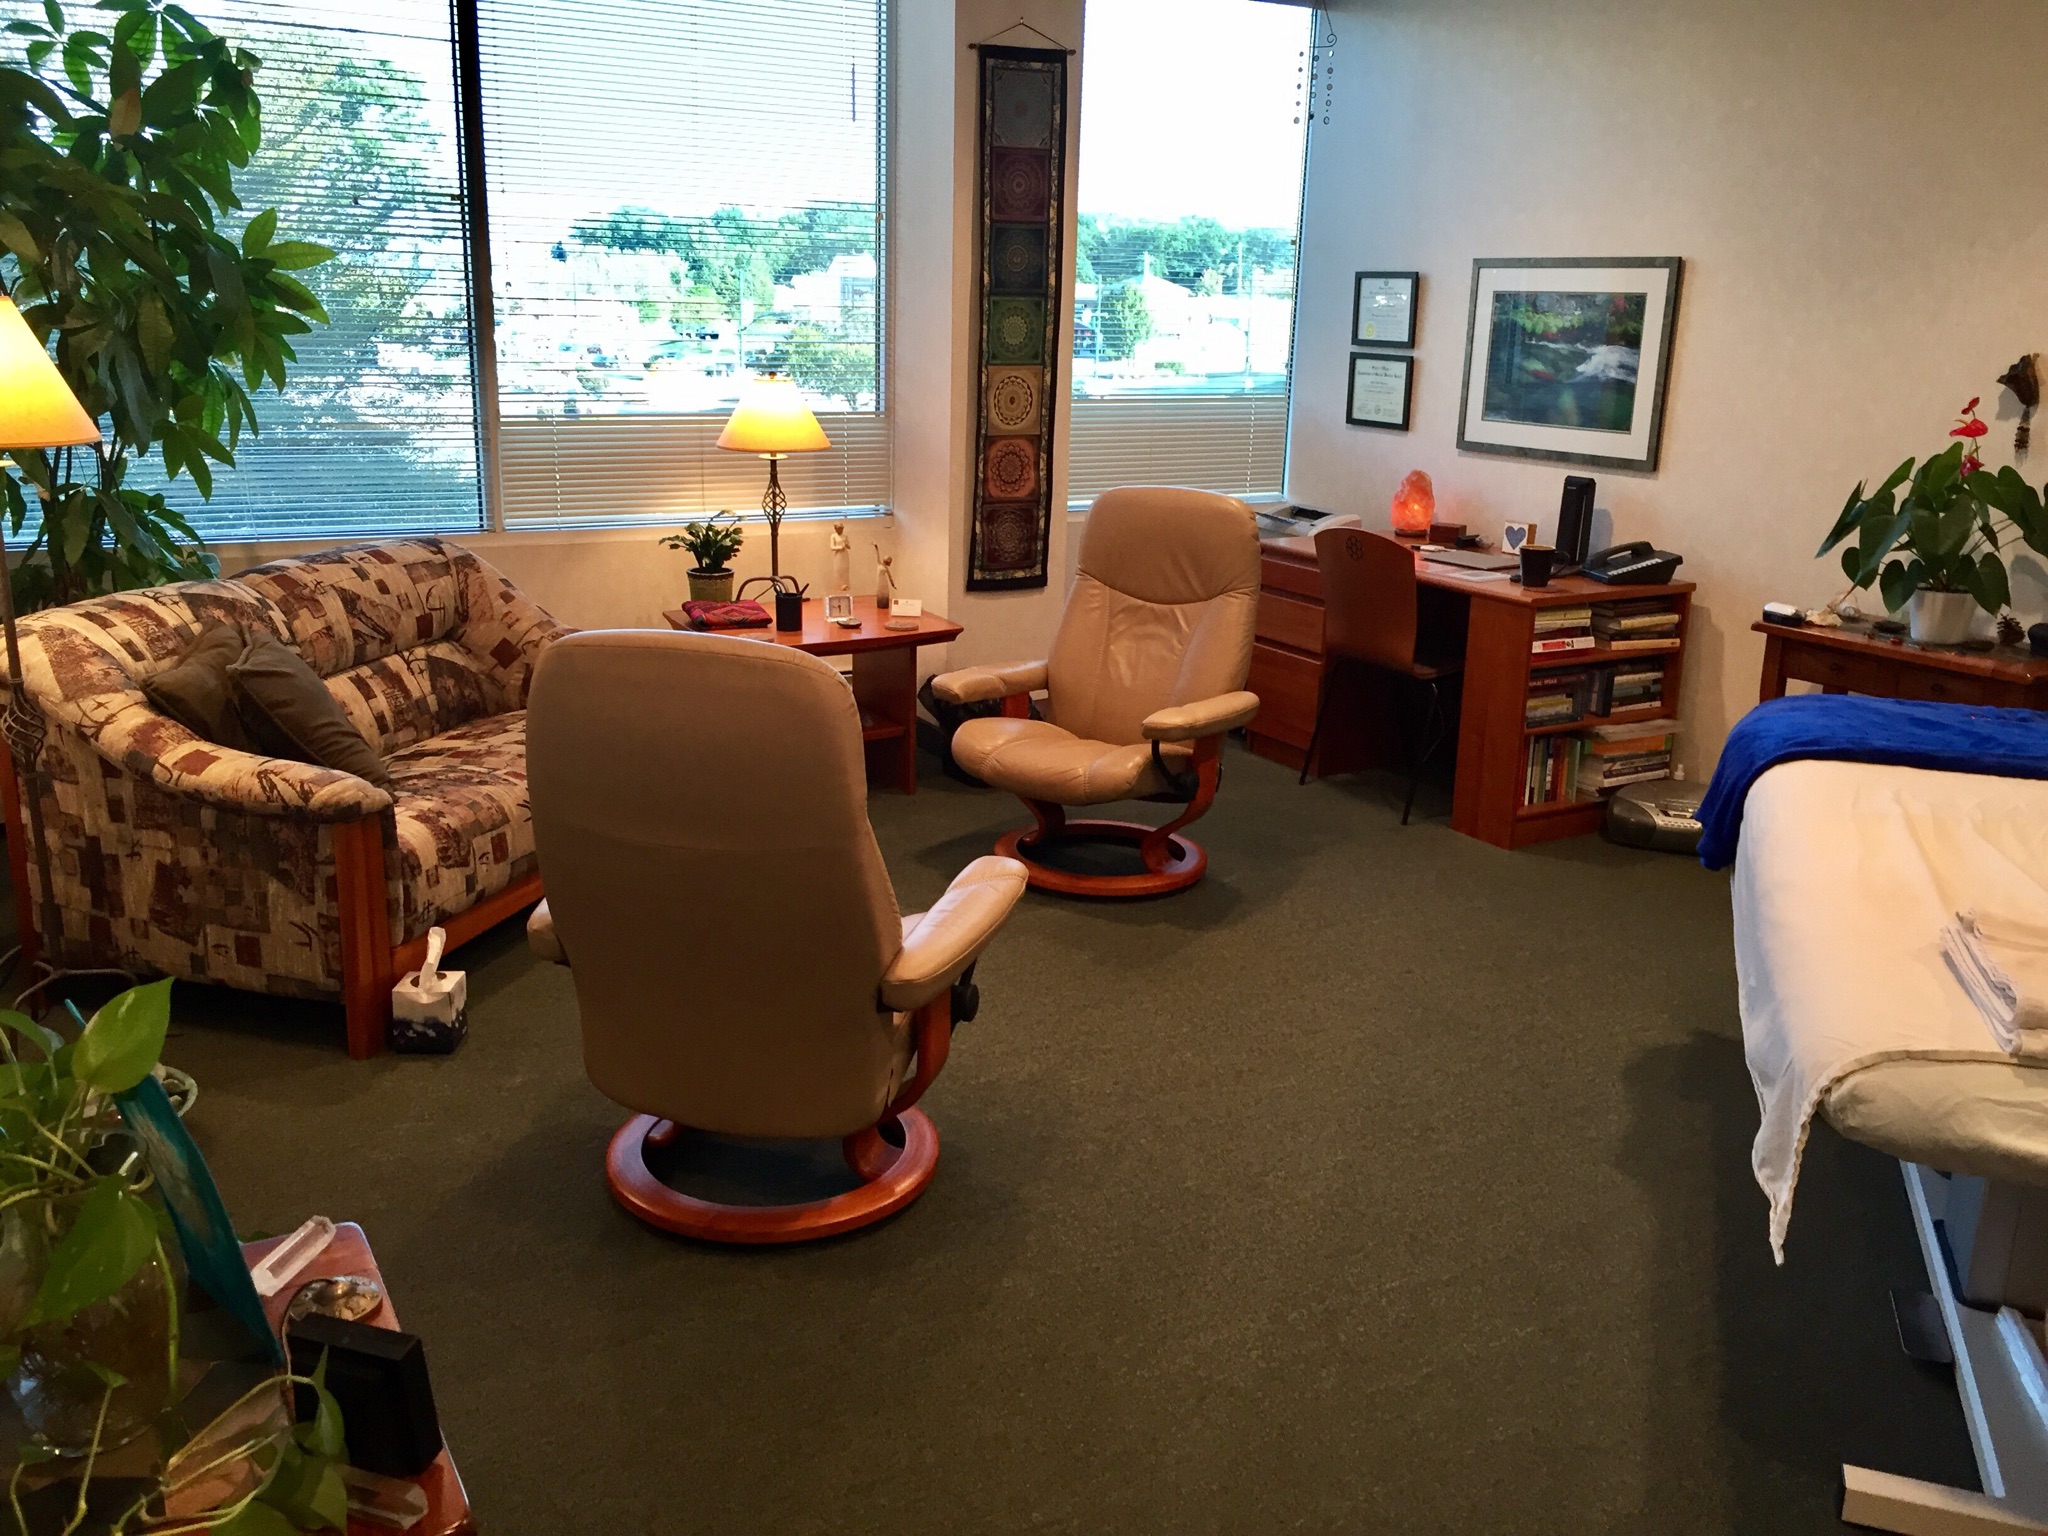 Treatment room for Counseling Psychotherapy and Complementary and Alternative Methods